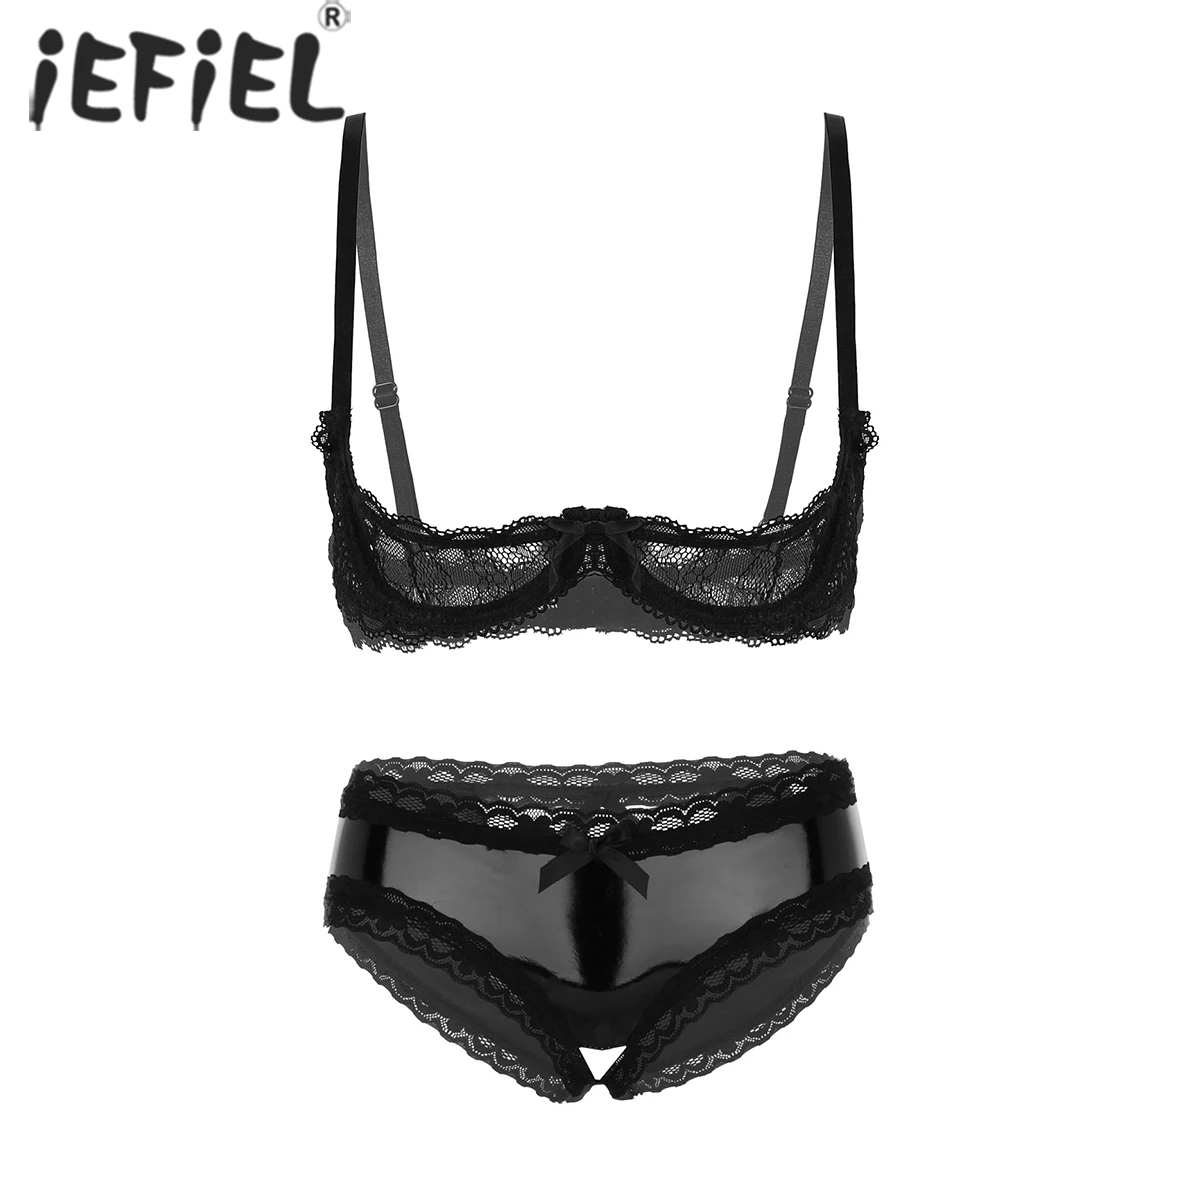 

Women See-through Lace Underwire Bra Tops with Wet Look Crotchless Cutout Panties Two-piece Lingerie Costumes for Nightclub